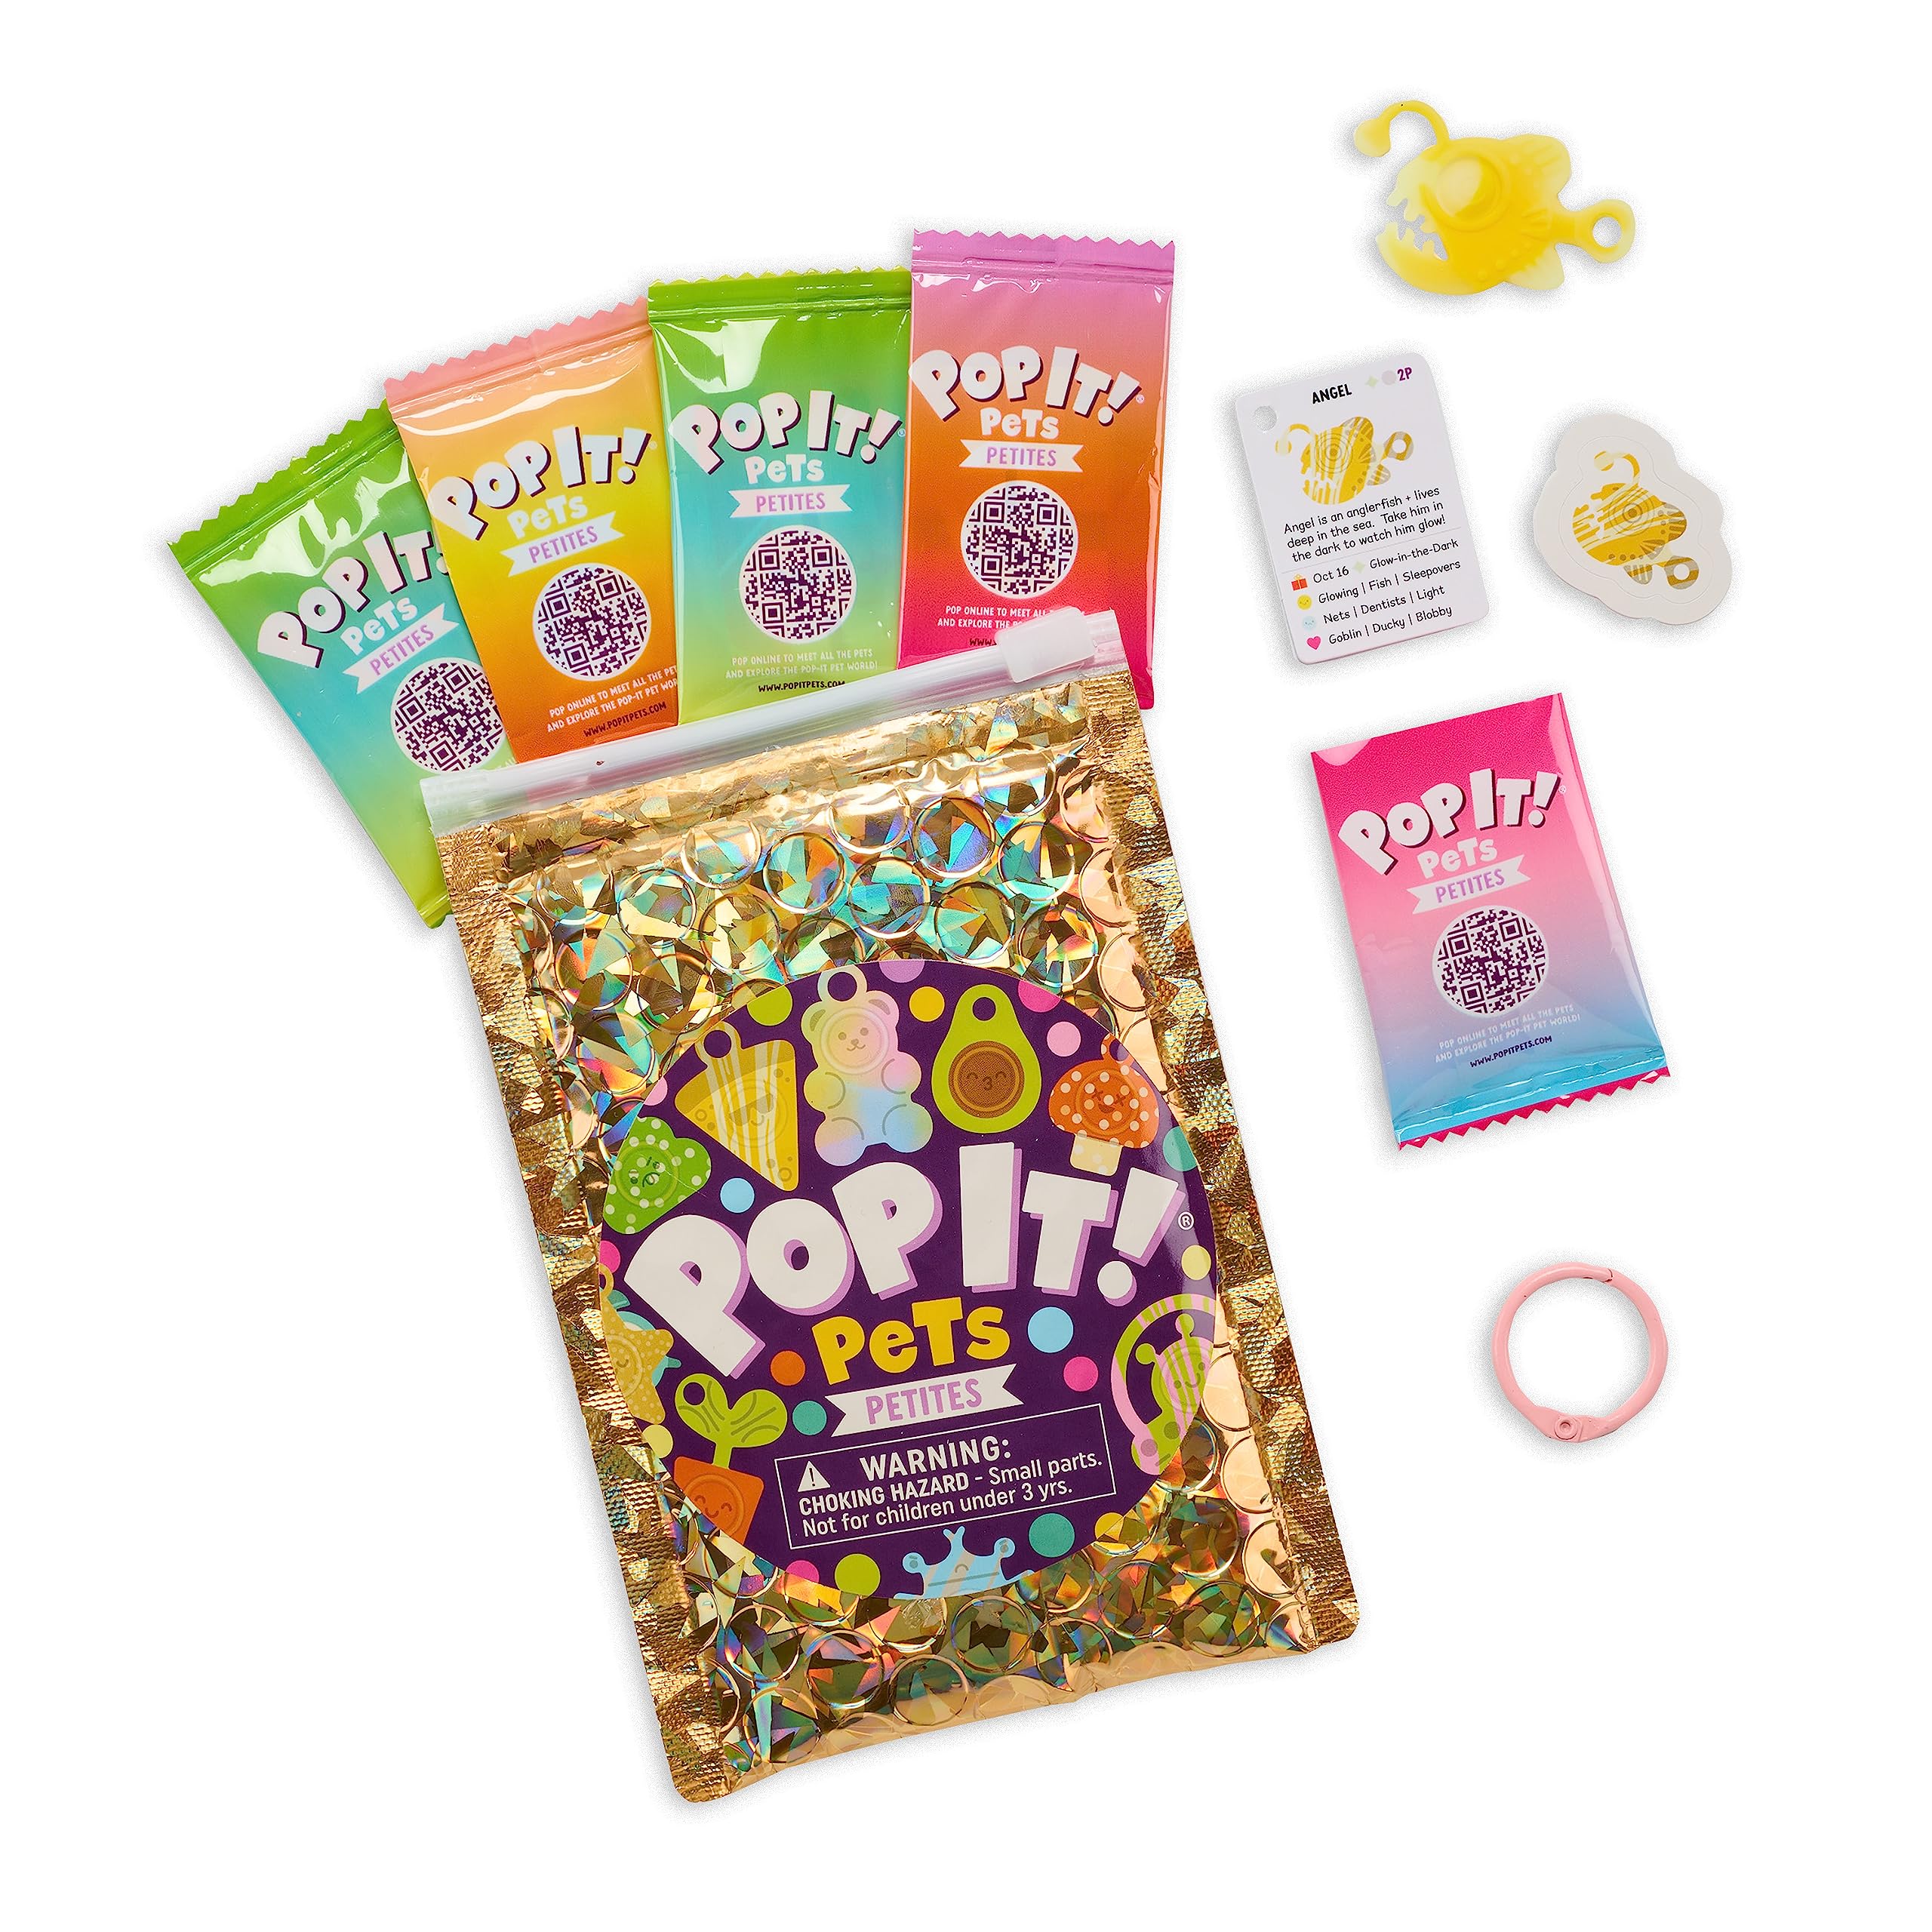 Pop It! Pets Petites - Season 2 - The Ultimate Mini Sensory Fidget Toy - Popping Bubbles and Adorable Characters for Your Pets - Collector map with Cards and Stickers from Buffalo Games